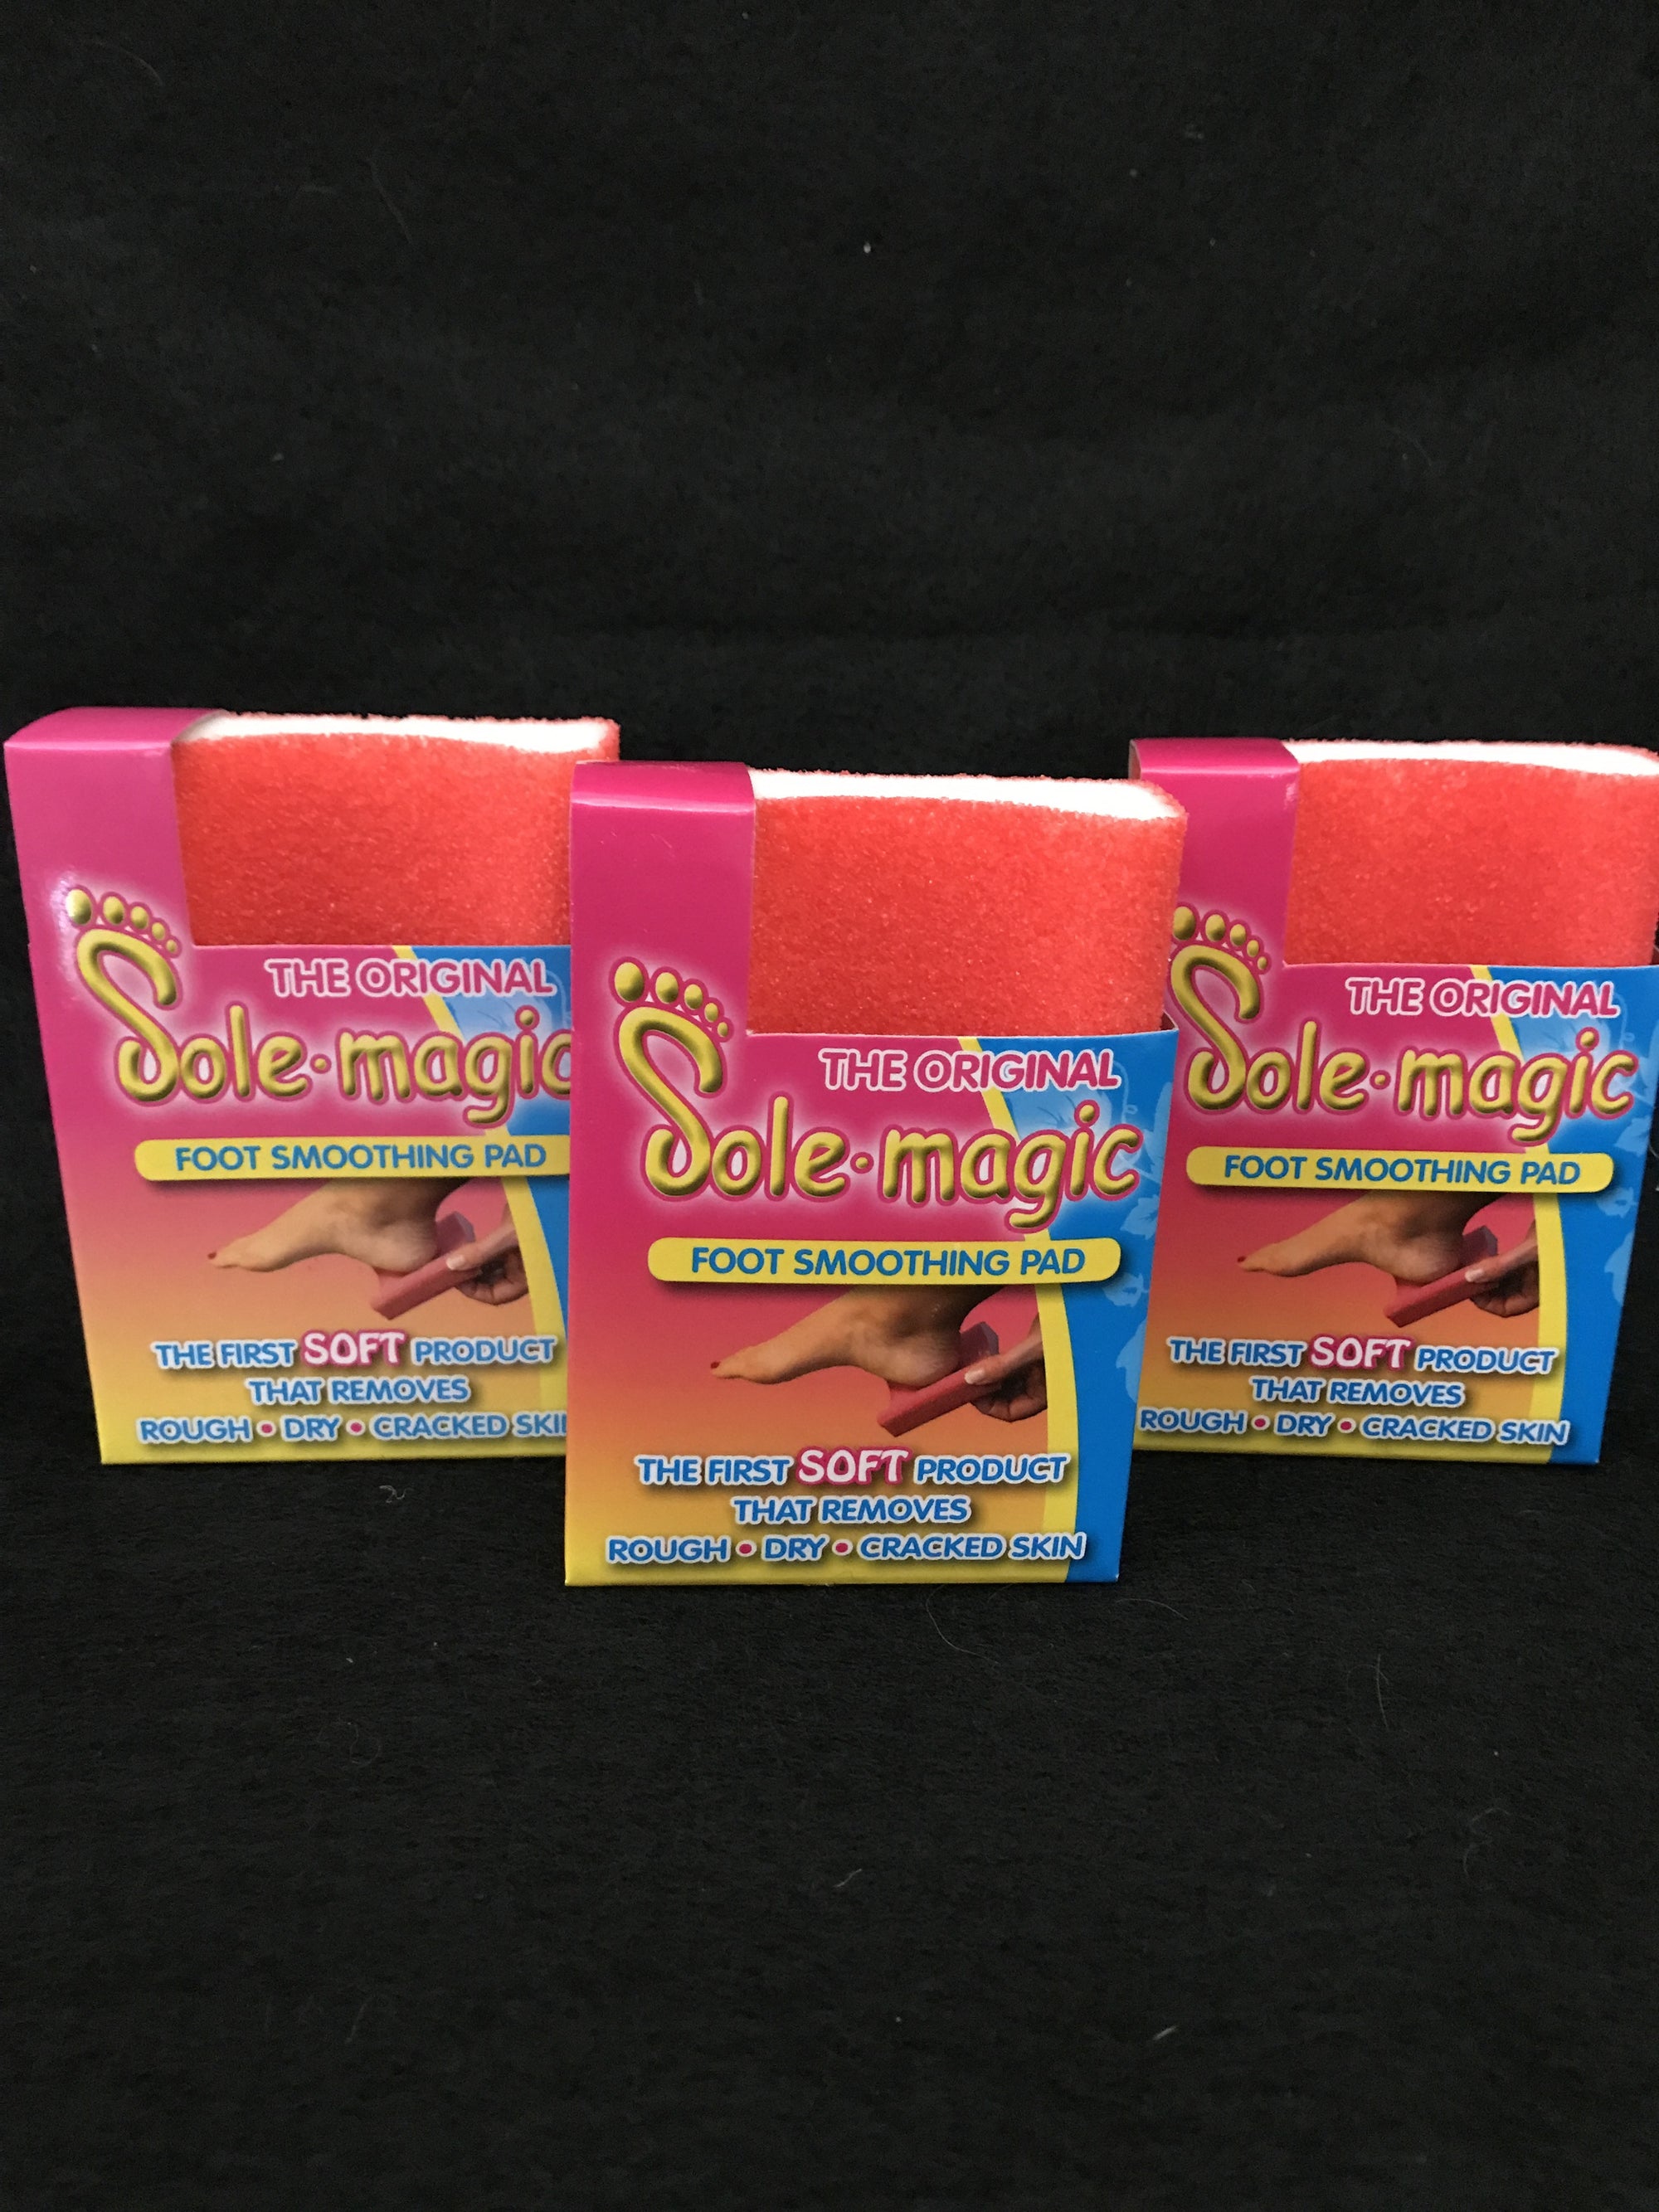 Sole-magic Foot Smoothing Pad